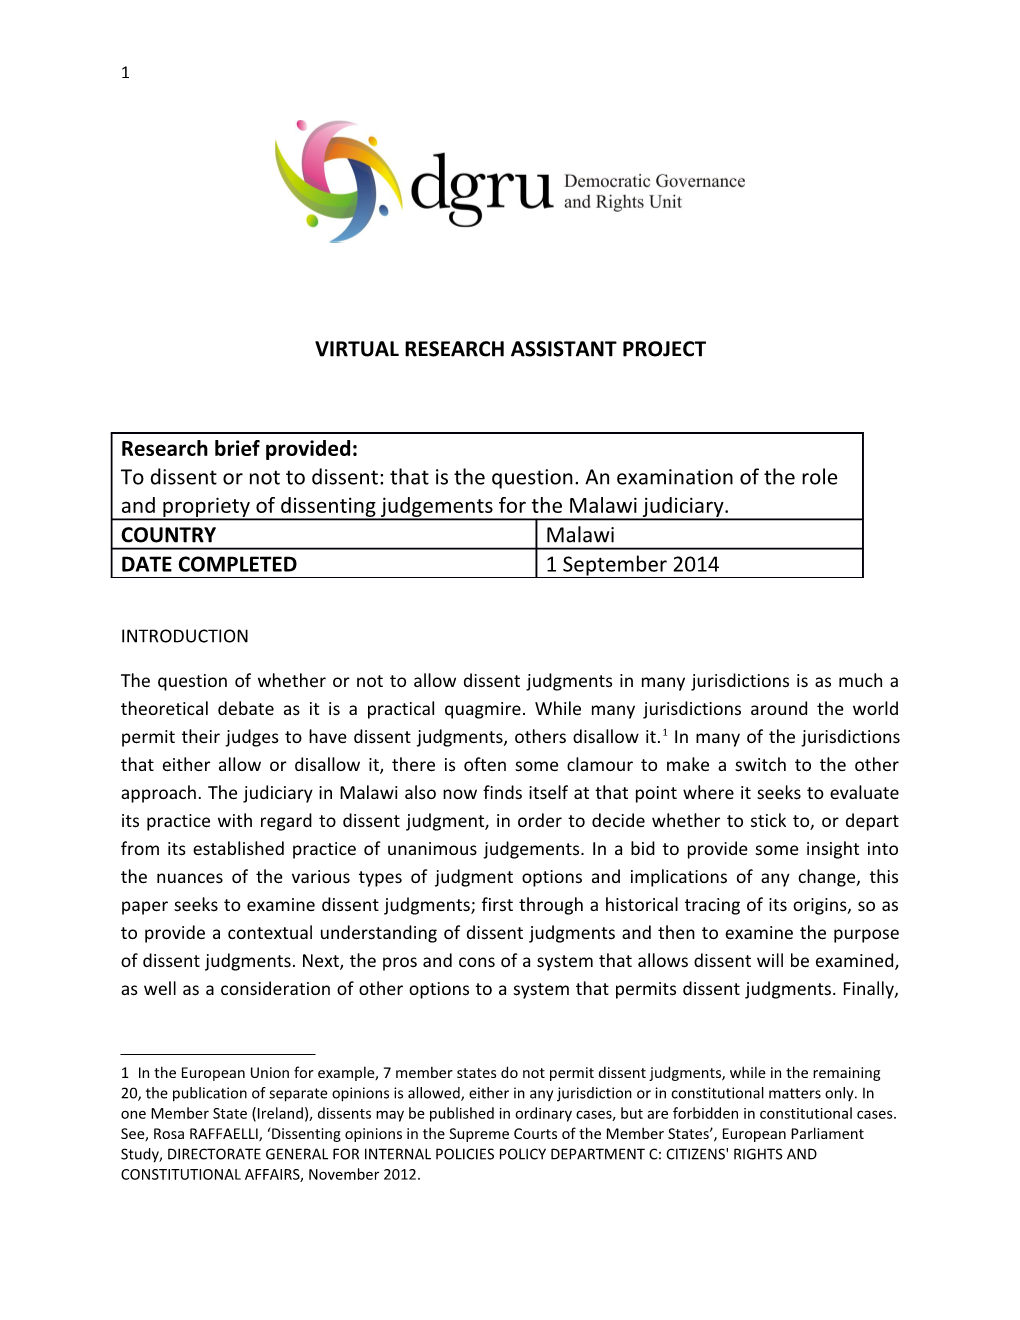 Virtual Research Assistant Project